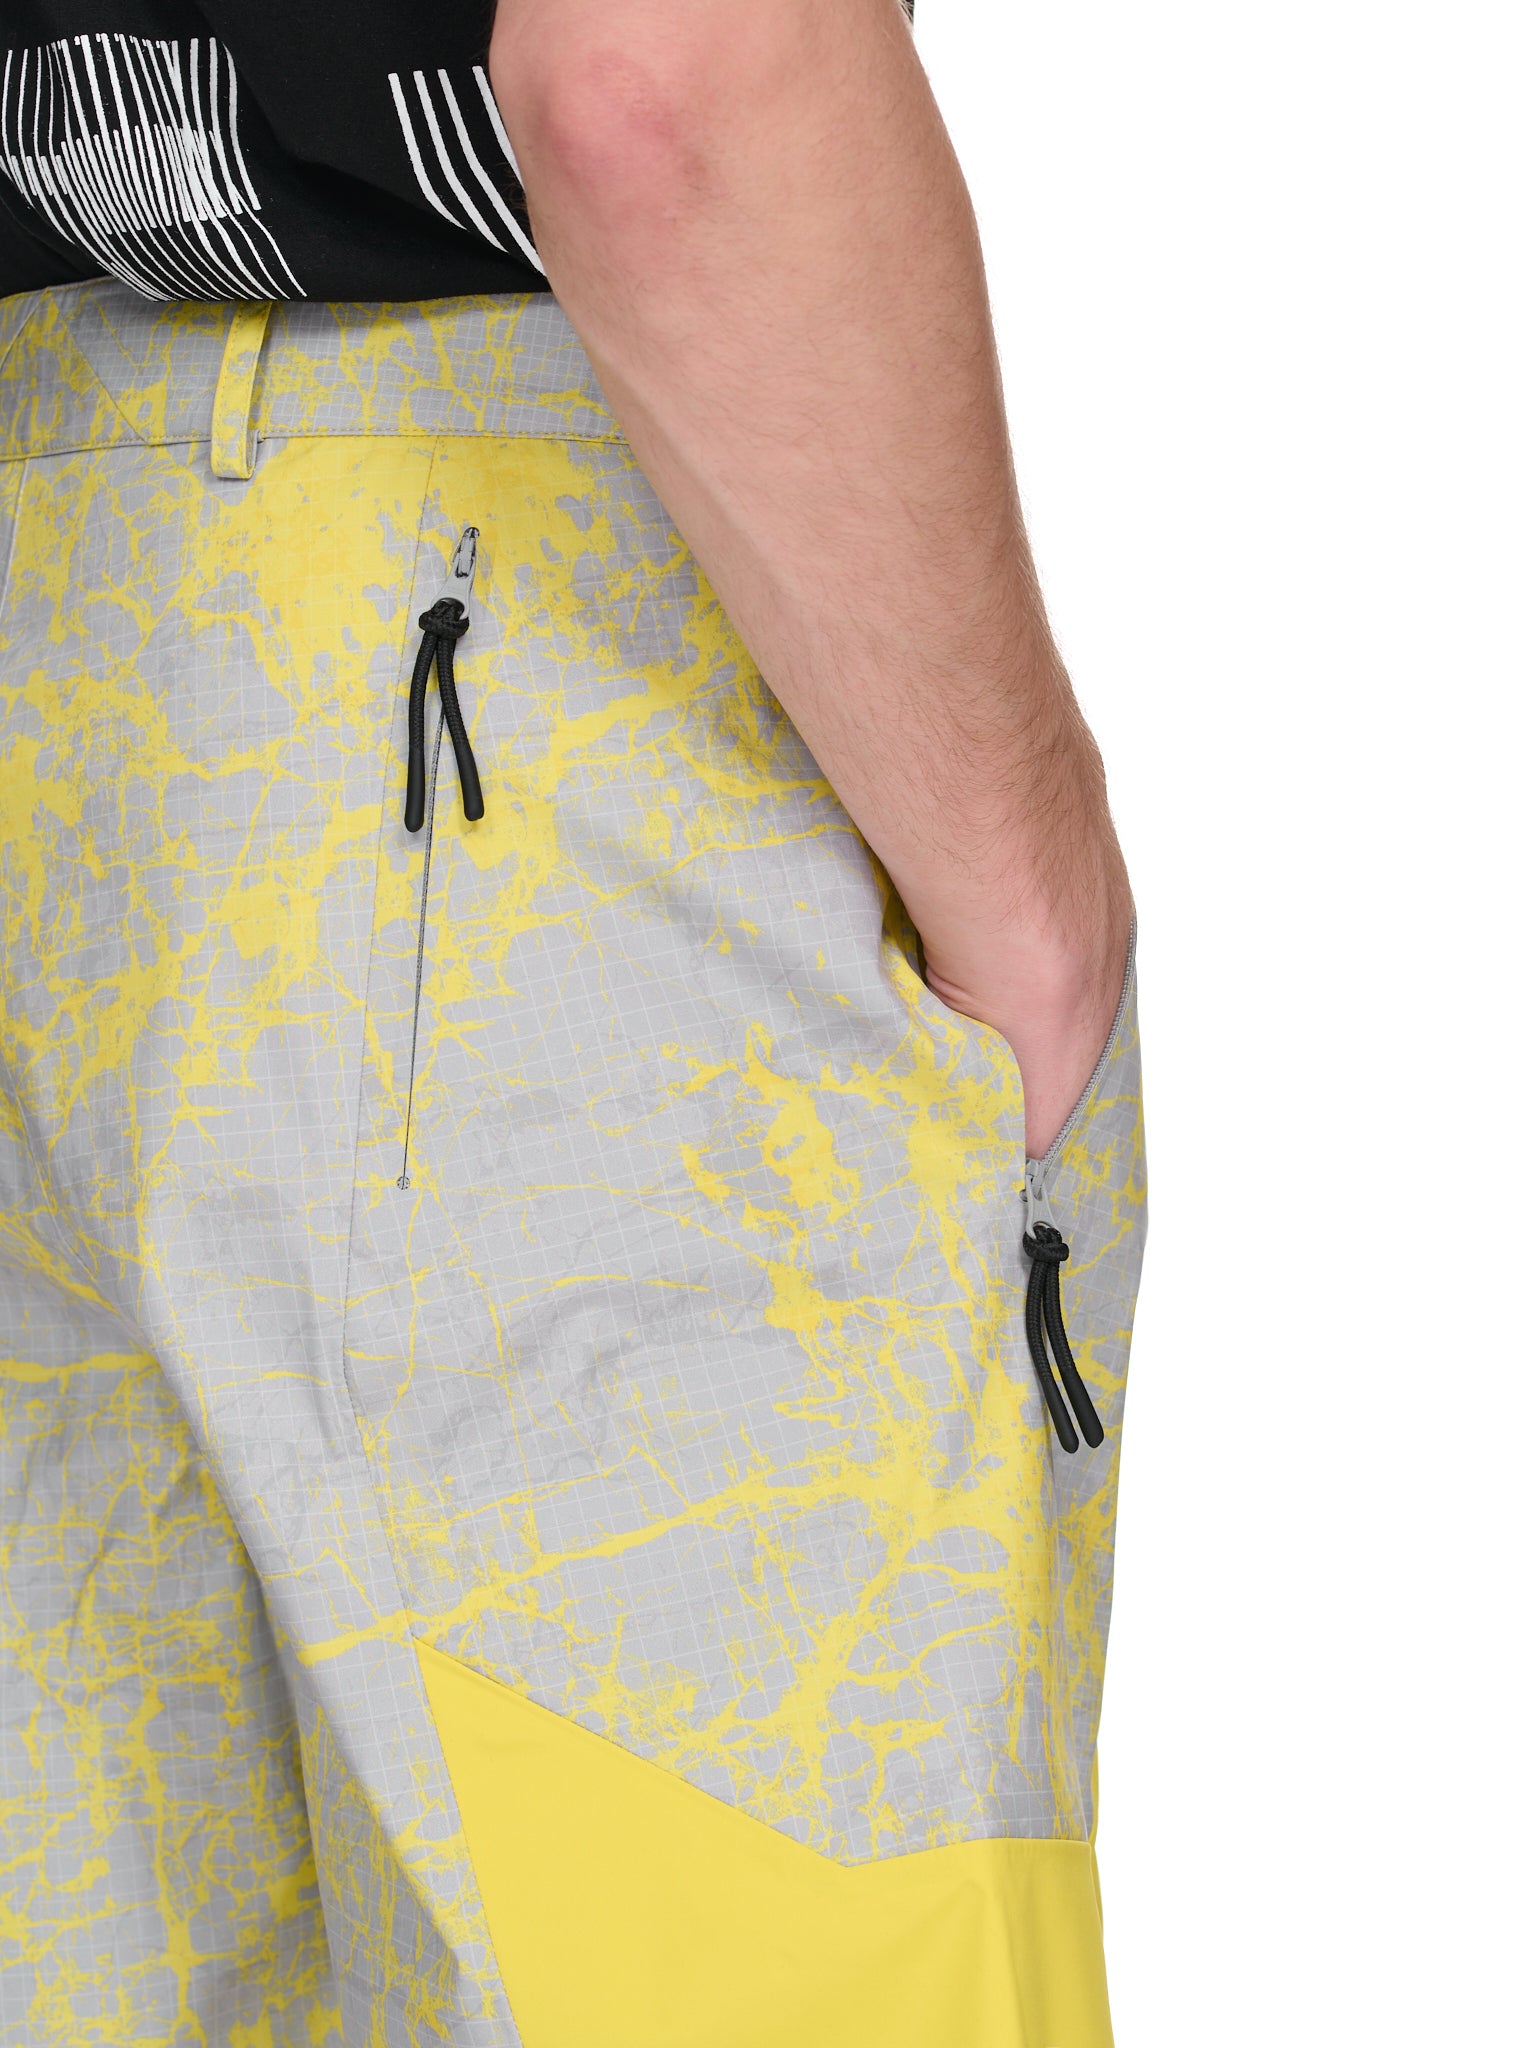 Grisdale Storm Shorts (ACWMB178-TUSCAN-YELLOW)